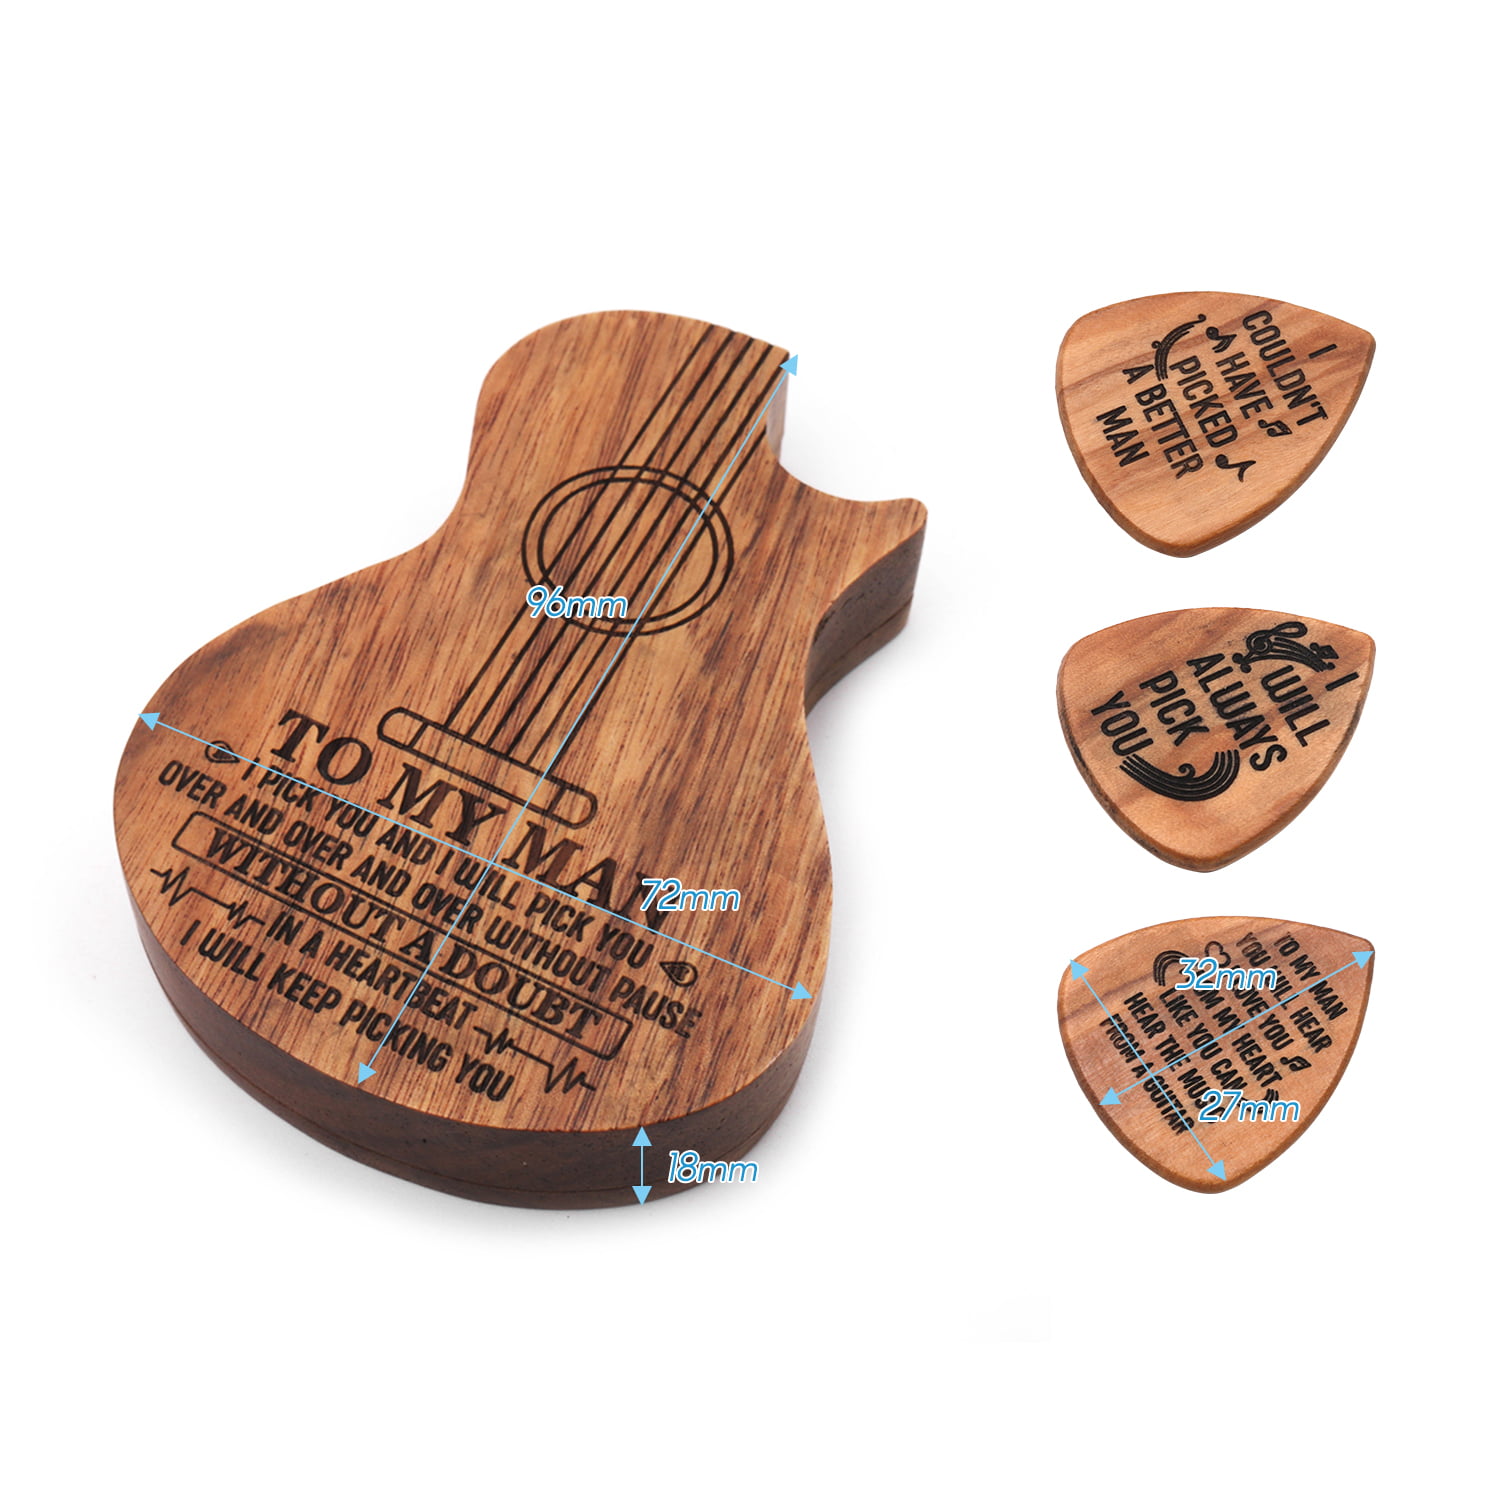 SUPERDANT Guitar Wooden Picks Box Guitar Pick Organizer for Daughter Plectrum Container Wooden Collector with 6 Pcs Traingle Wood Guitar Picks for Electric Bass Guitar Music Instrument Accessory 